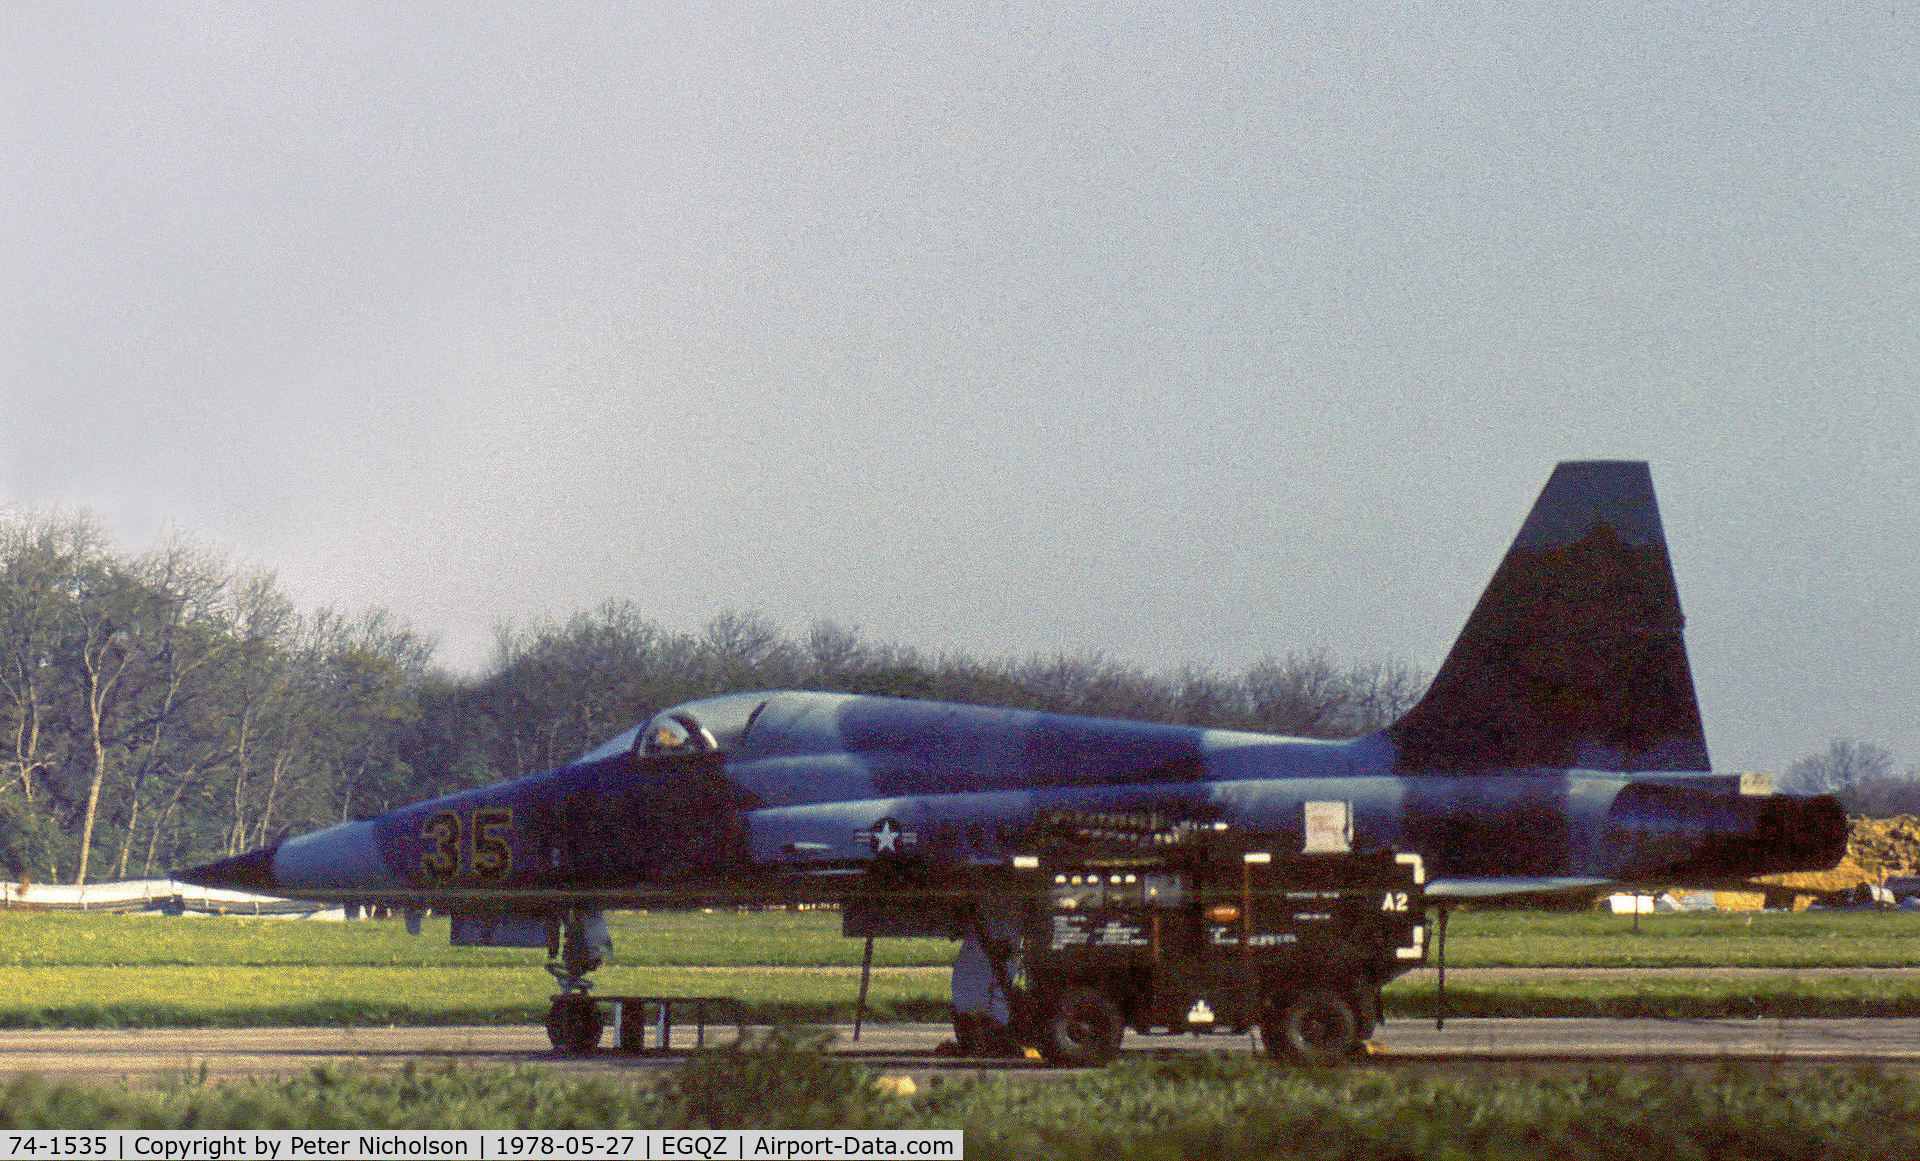 74-1535, 1976 Northrop F-5E Tiger II C/N R.1193, F-5E Tiger II of the 527th Tactical Fighter Training Aggressor Squadron at RAF Alconbury as seen there in the Summer of 1978.